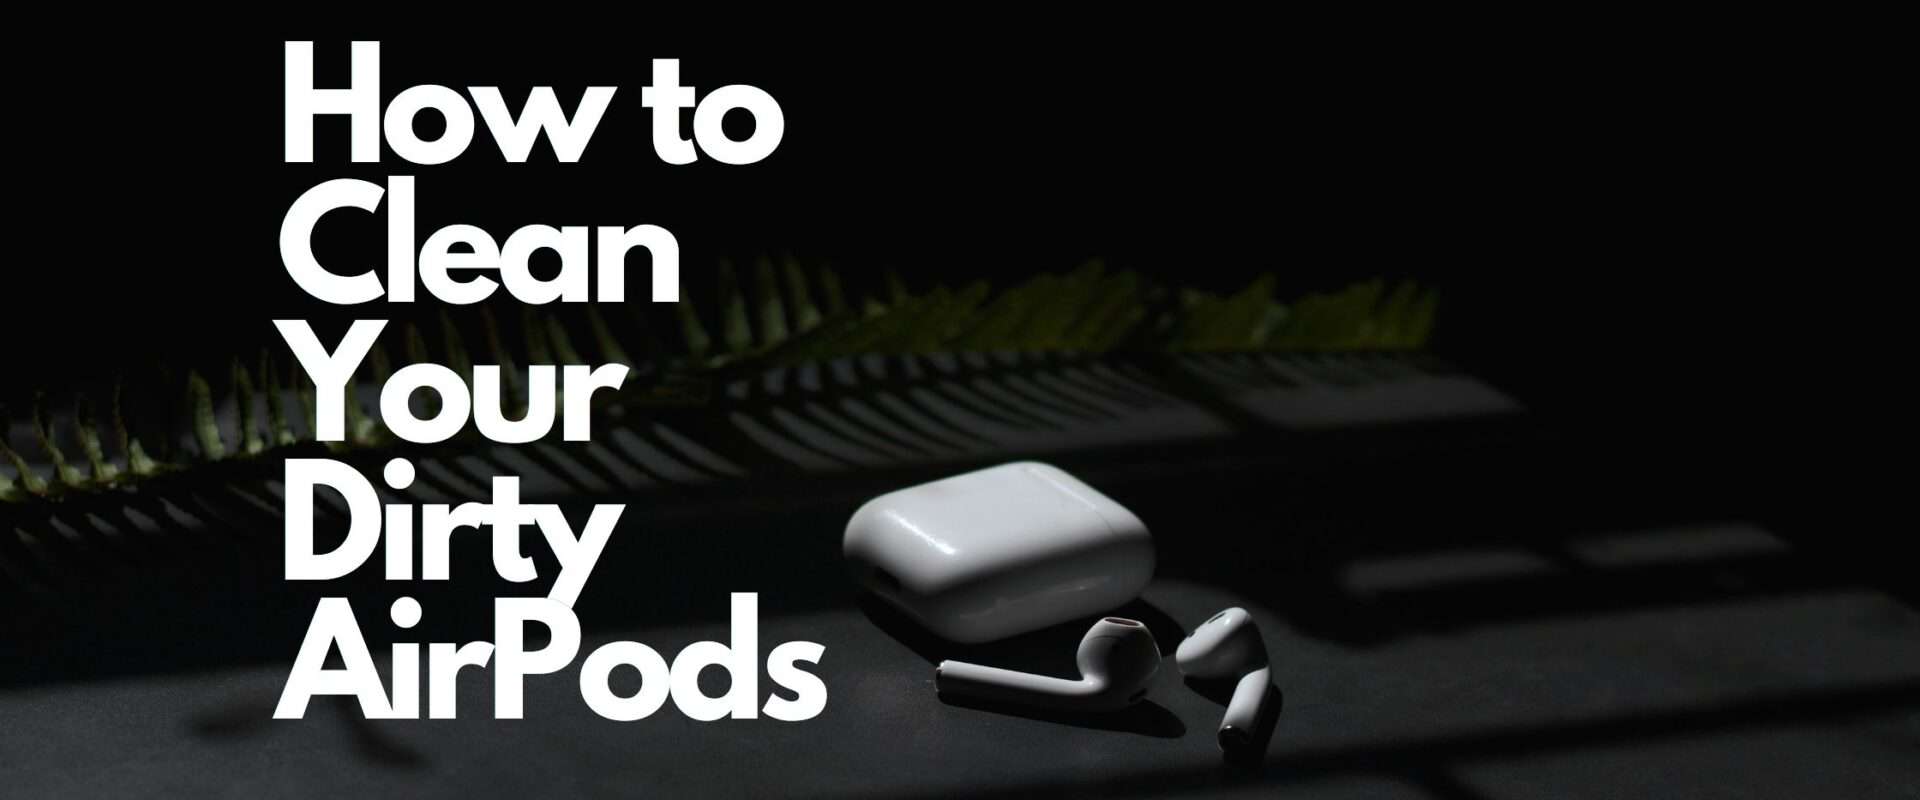 How to Clean Your Dirty AirPods